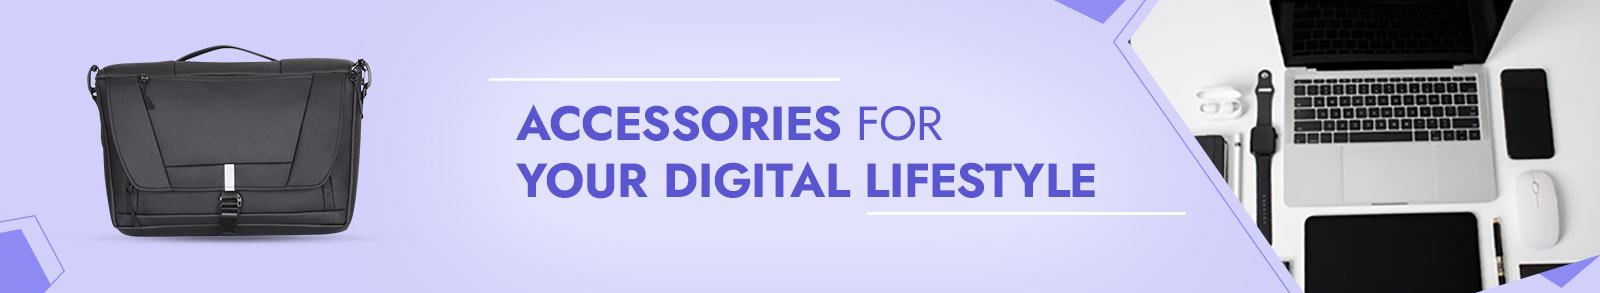 Accessories For Your Digital Lifestyle